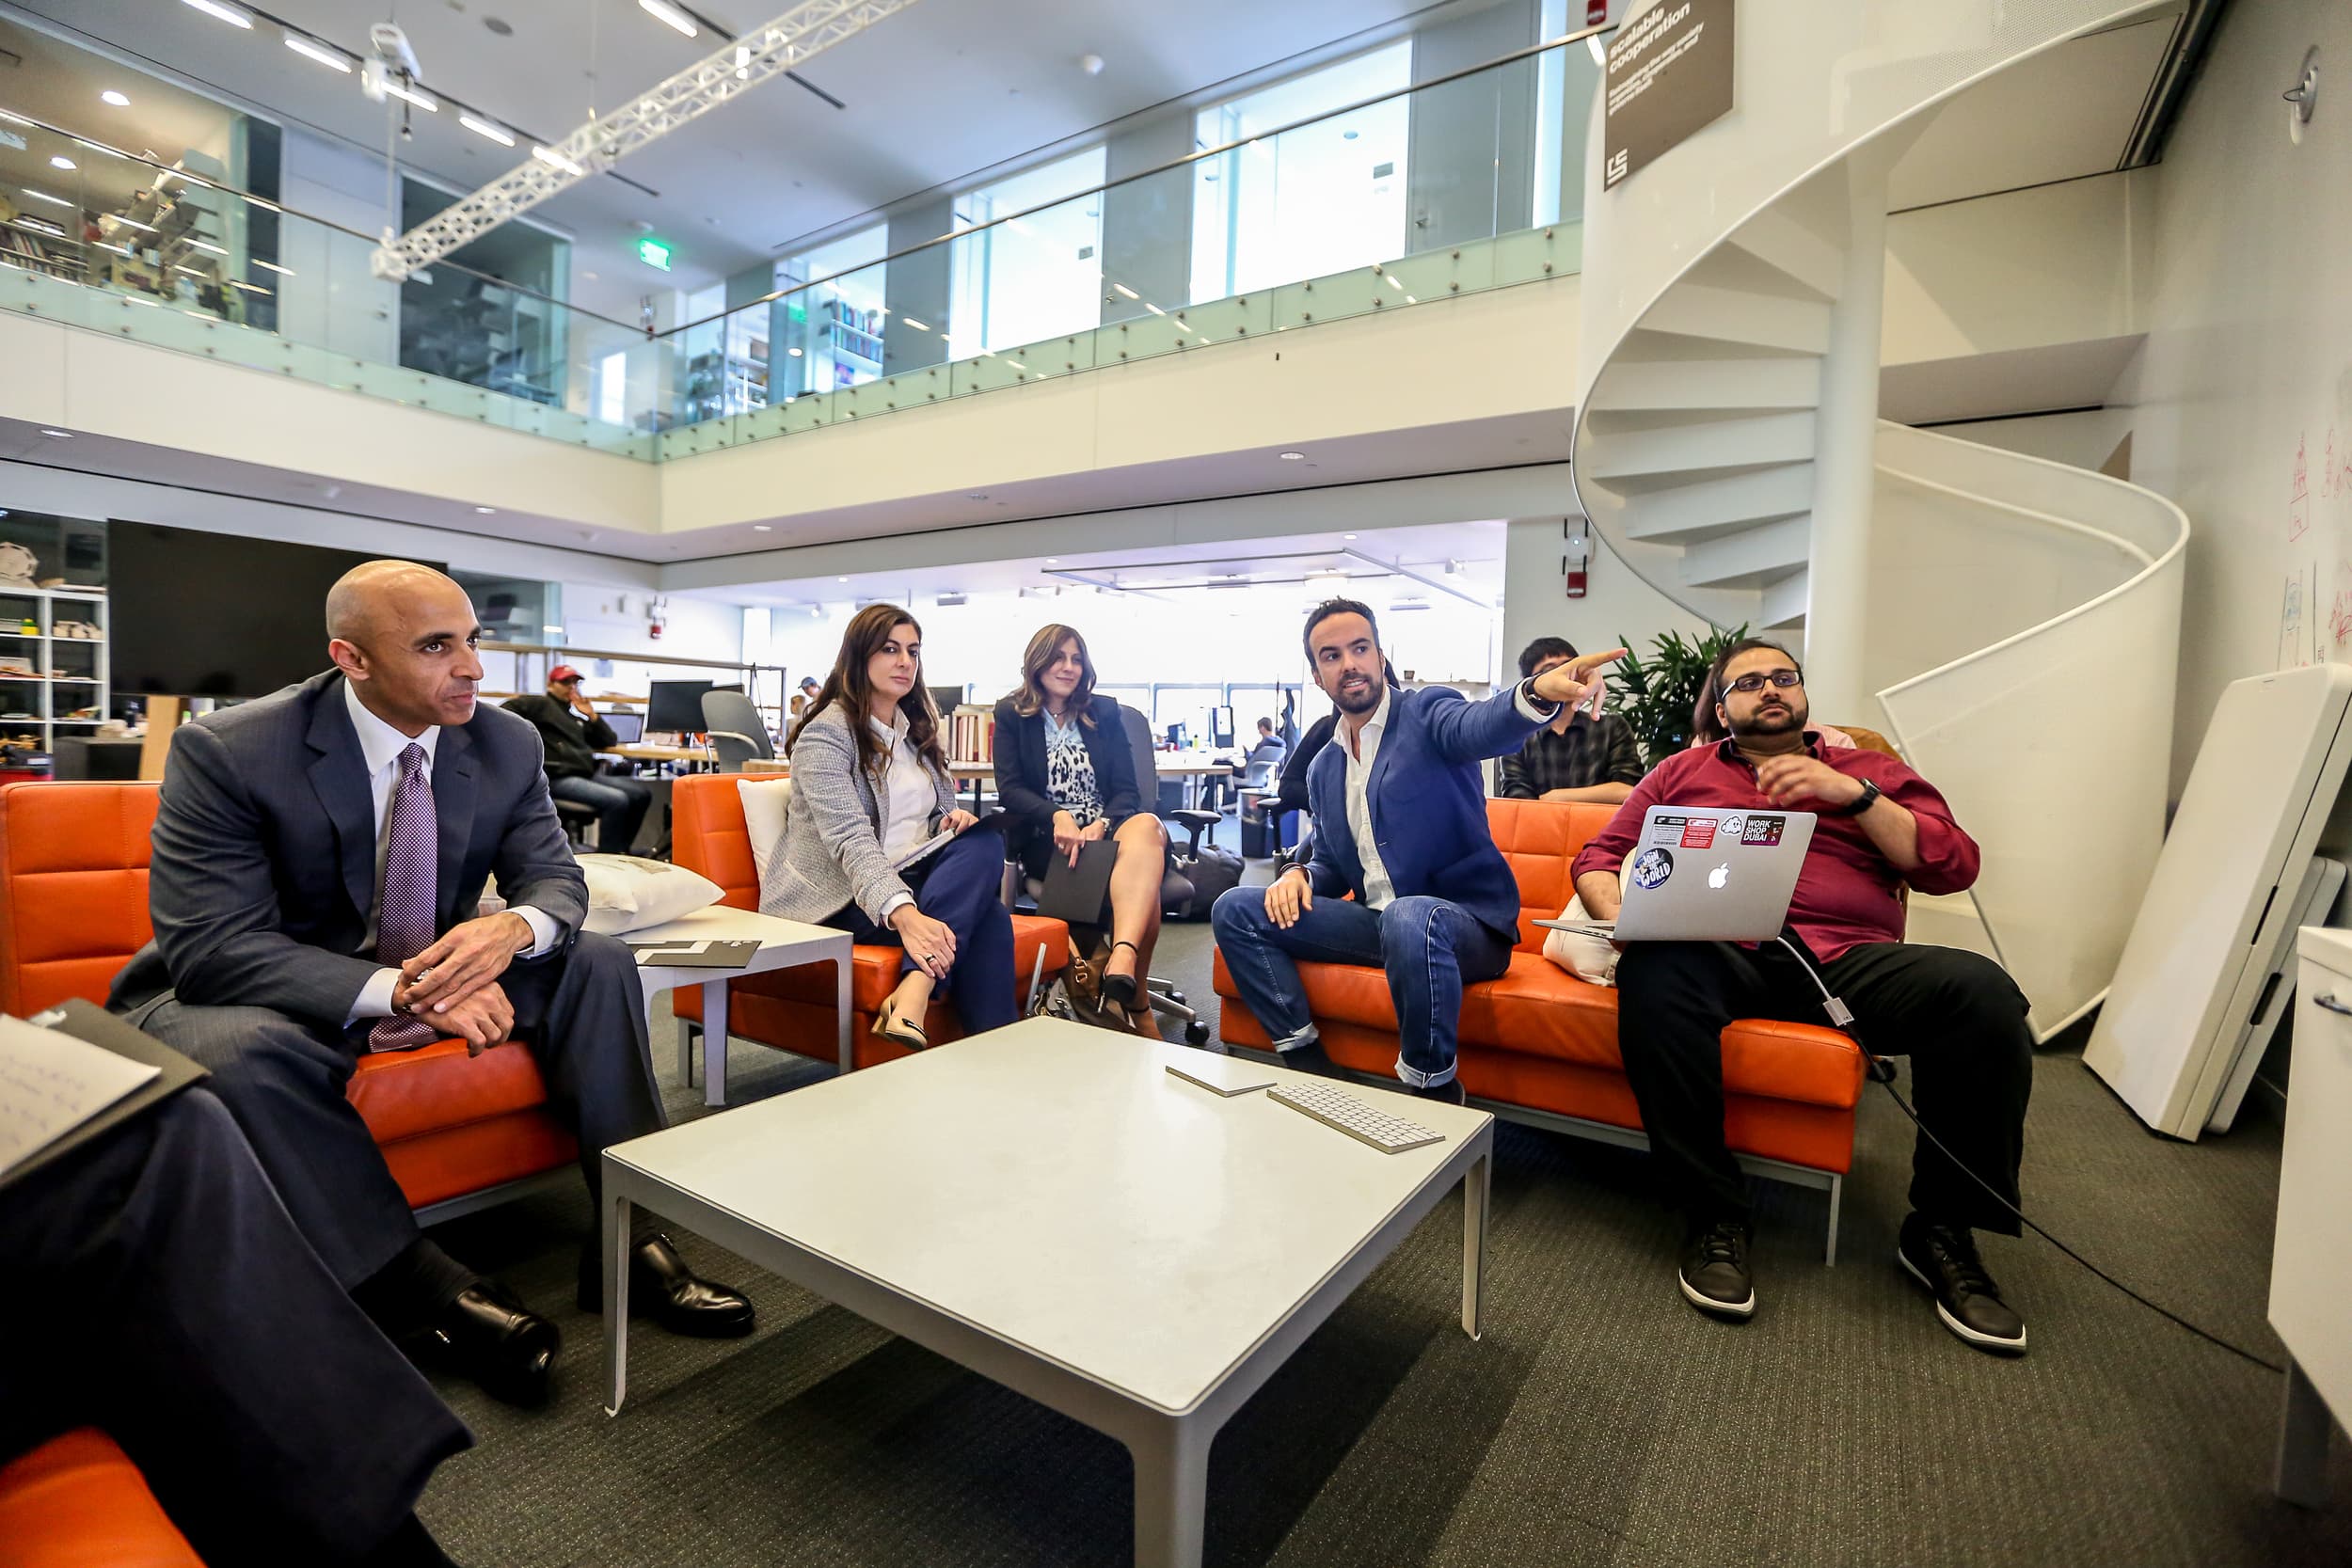 Ambassador Yousef Al Otaiba visits Massachusetts Institute of Technology (MIT) Media Lab in Cambridge to meet with Director Joi Ito, Faculty and innovators including #Emirati post graduate students to discuss #UAEUSA shared initerests in technology and innovation during the ambassador's outreach trip to Boston in October 2016